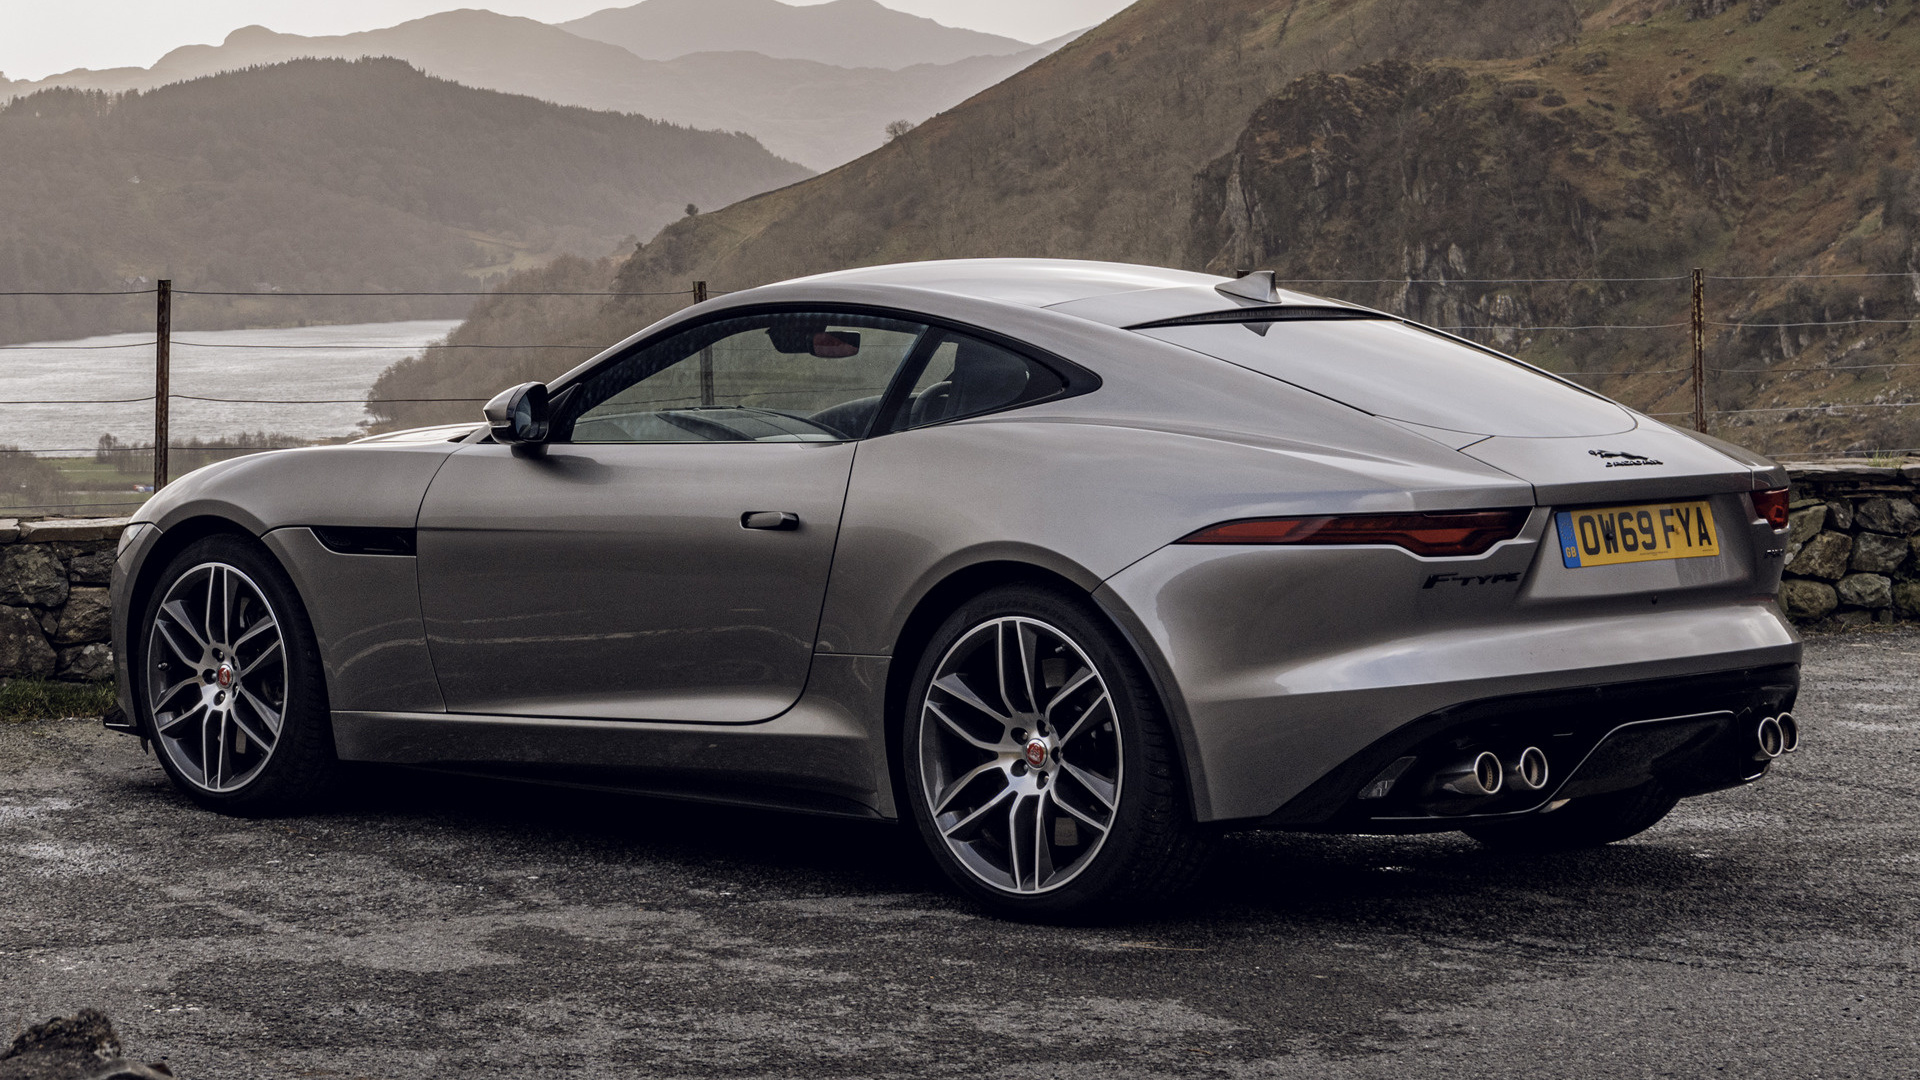 2020 Jaguar F-Type Coupe R-Dynamic (UK) - Wallpapers and ...